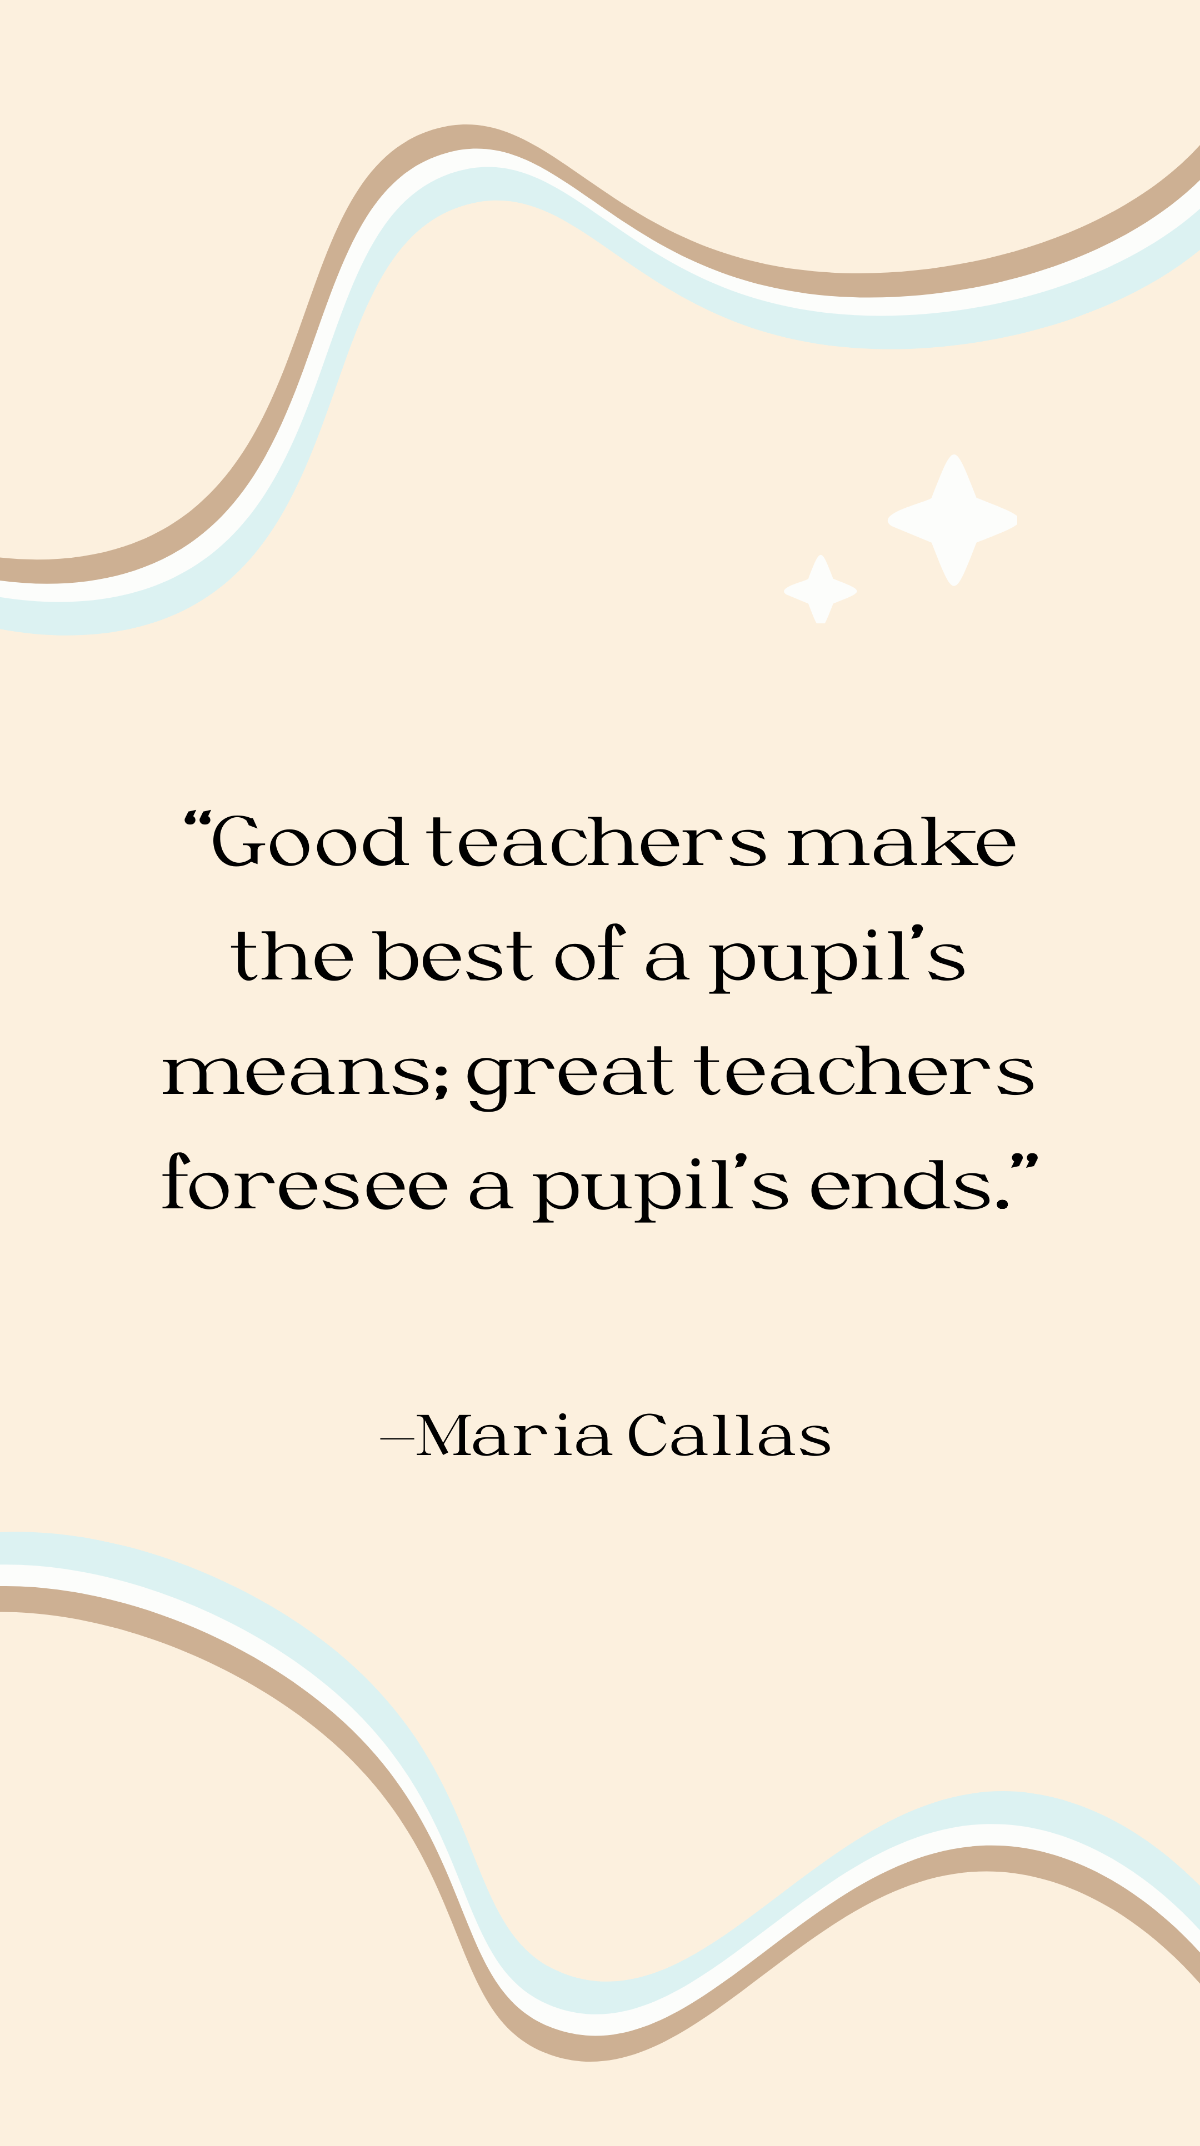 Maria Callas - Good teachers make the best of a pupil’s means; great teachers foresee a pupil’s ends. Template